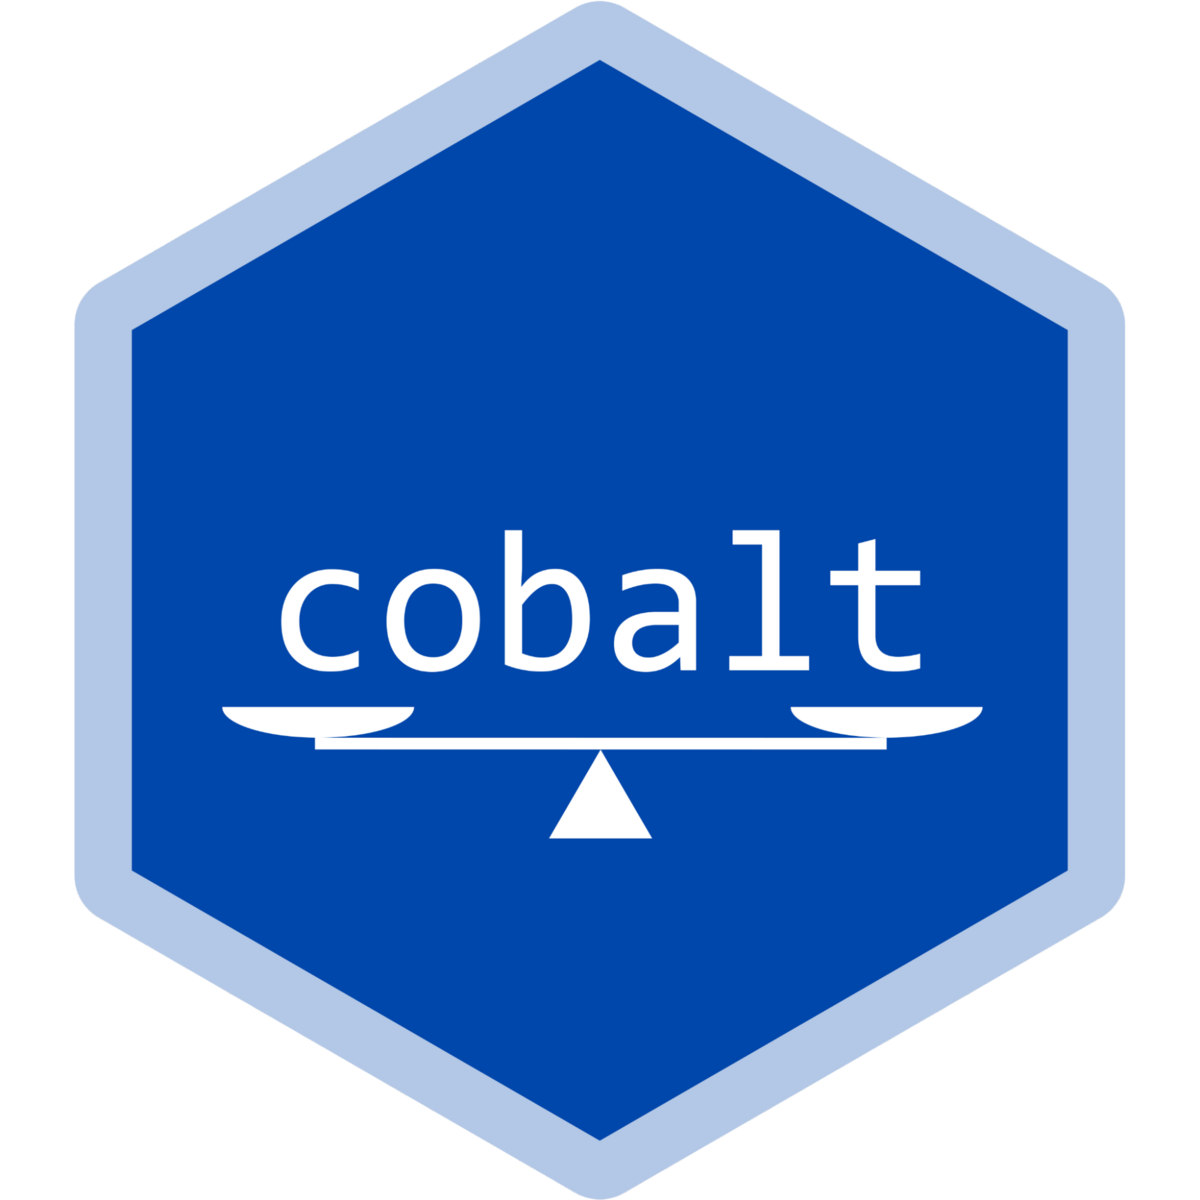 The logo for Cobalt: a blue hexagon with a simple balance scale under "cobalt".